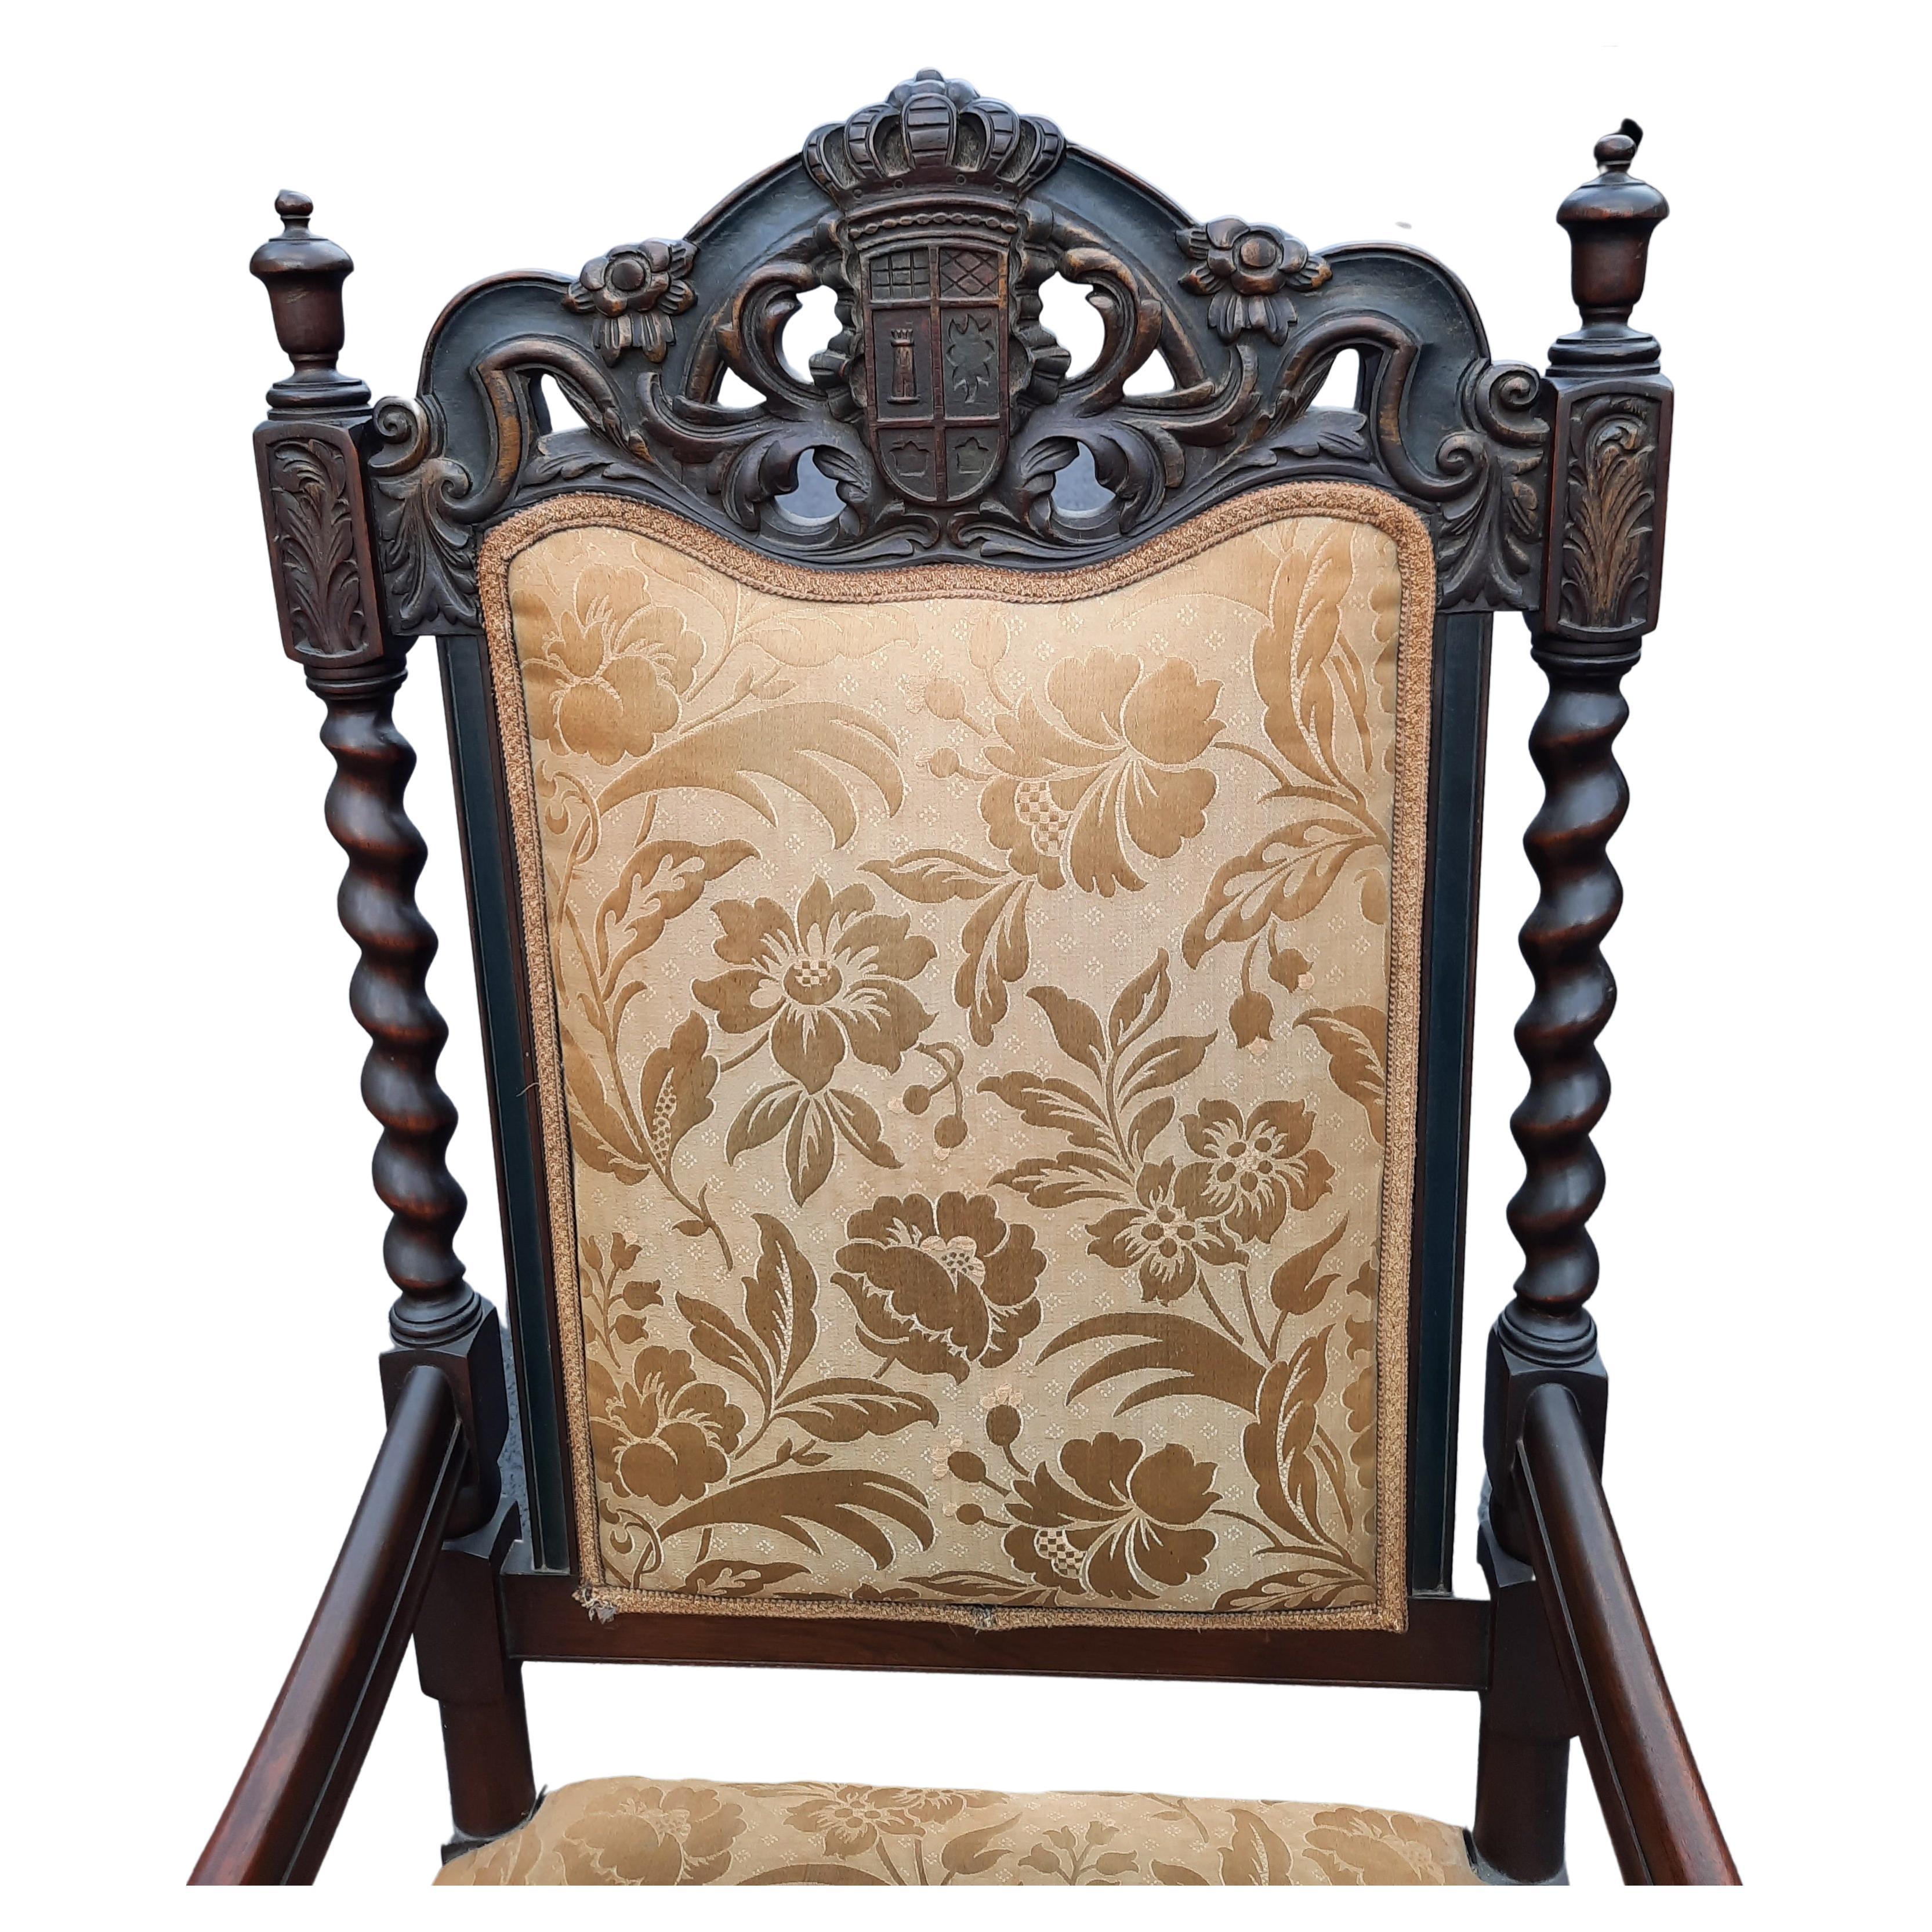 Stunning 19th century English Jacobean armchair. Chairs feature ornate spiral carved barley twist in oak. lower stretcher, intricate carved back and urn form finials. Very impressive hand-carved chairs with remarkable execution. Upholstery shows